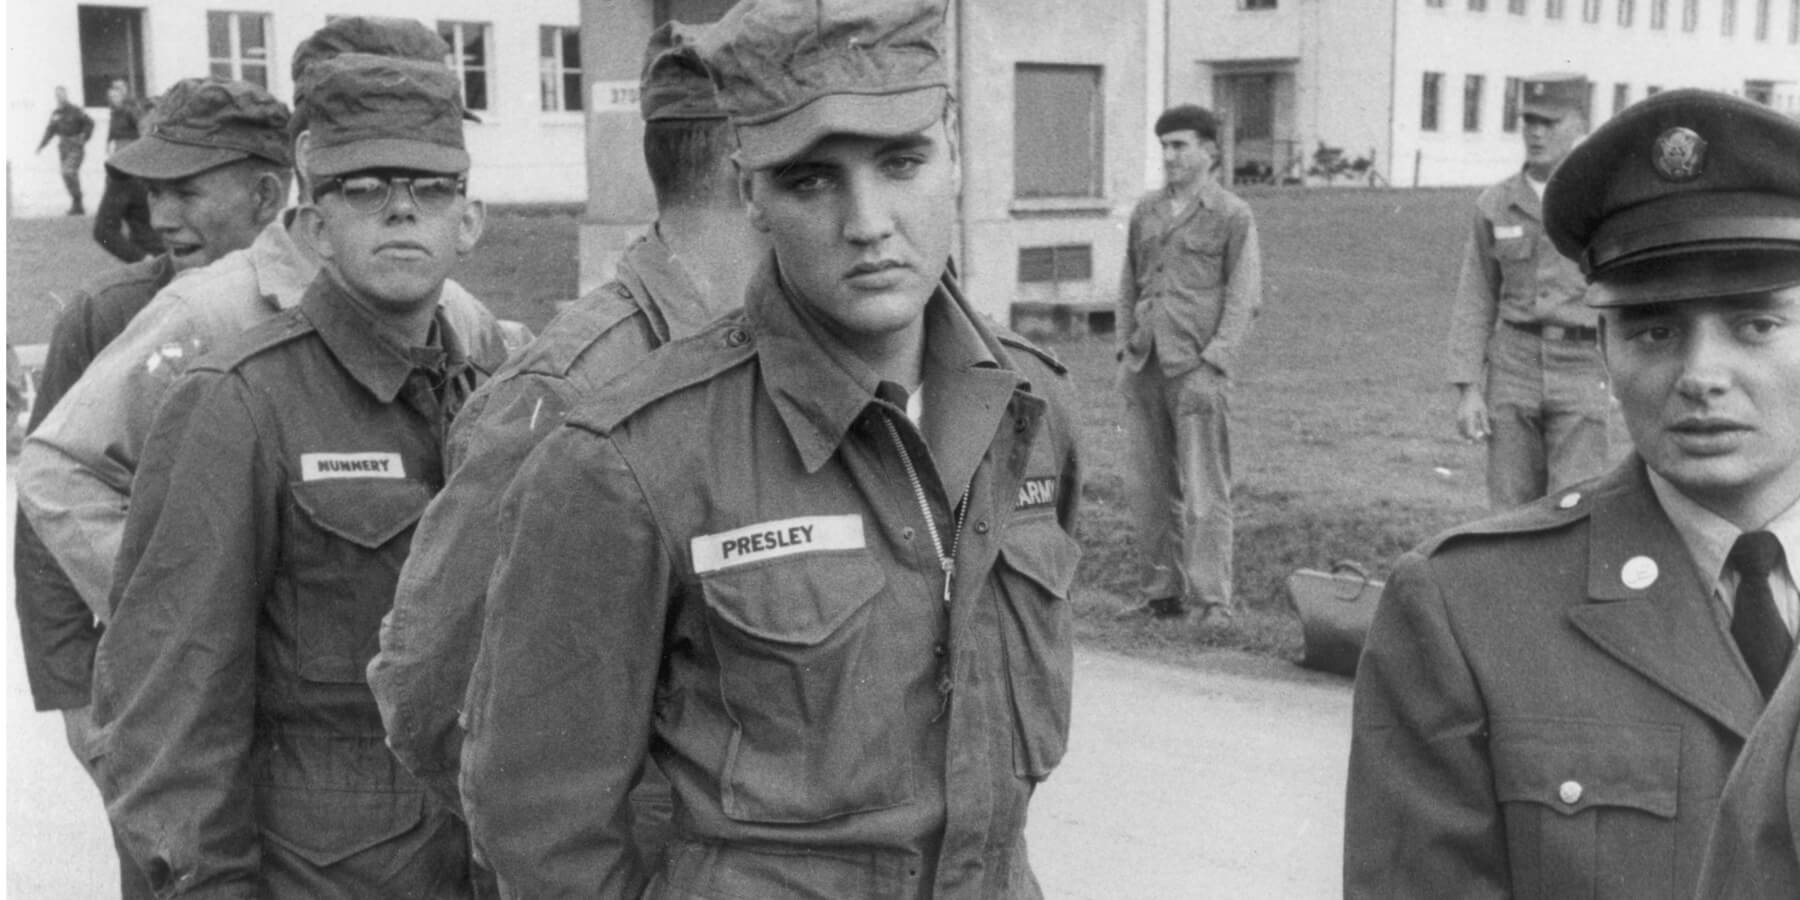 Elvis Presley serving with the United States Army in Germany.